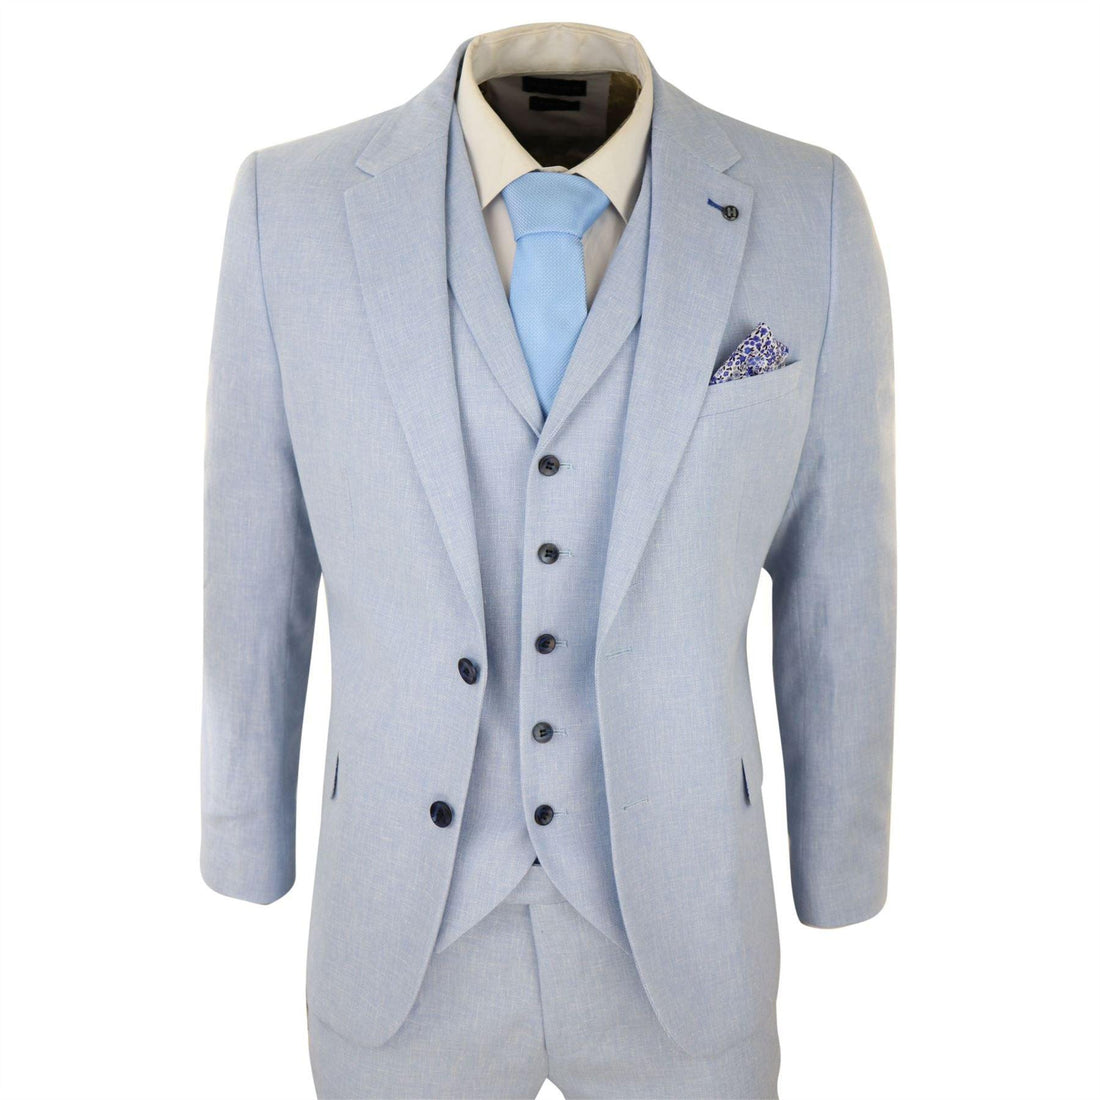 Mens 3 Piece Linen Suit Summer Breathable Wedding Cotton Baby Blue Light - Knighthood Store